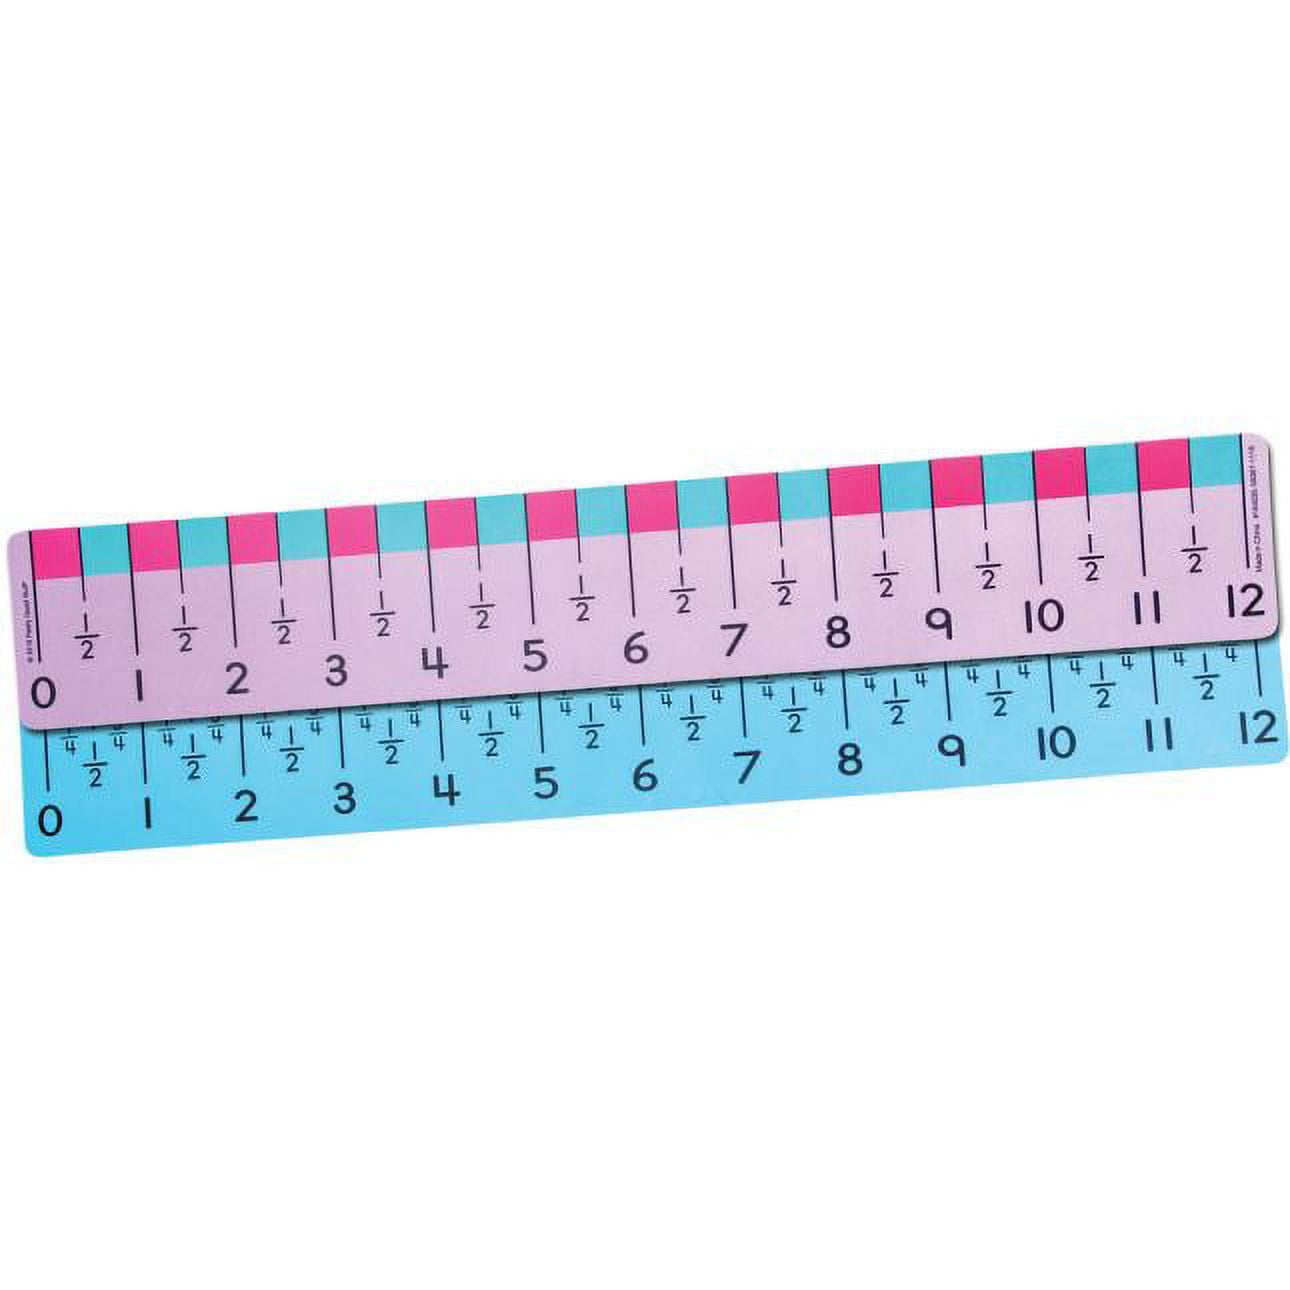 What are these 12 rulers used for? They don't have standard marks